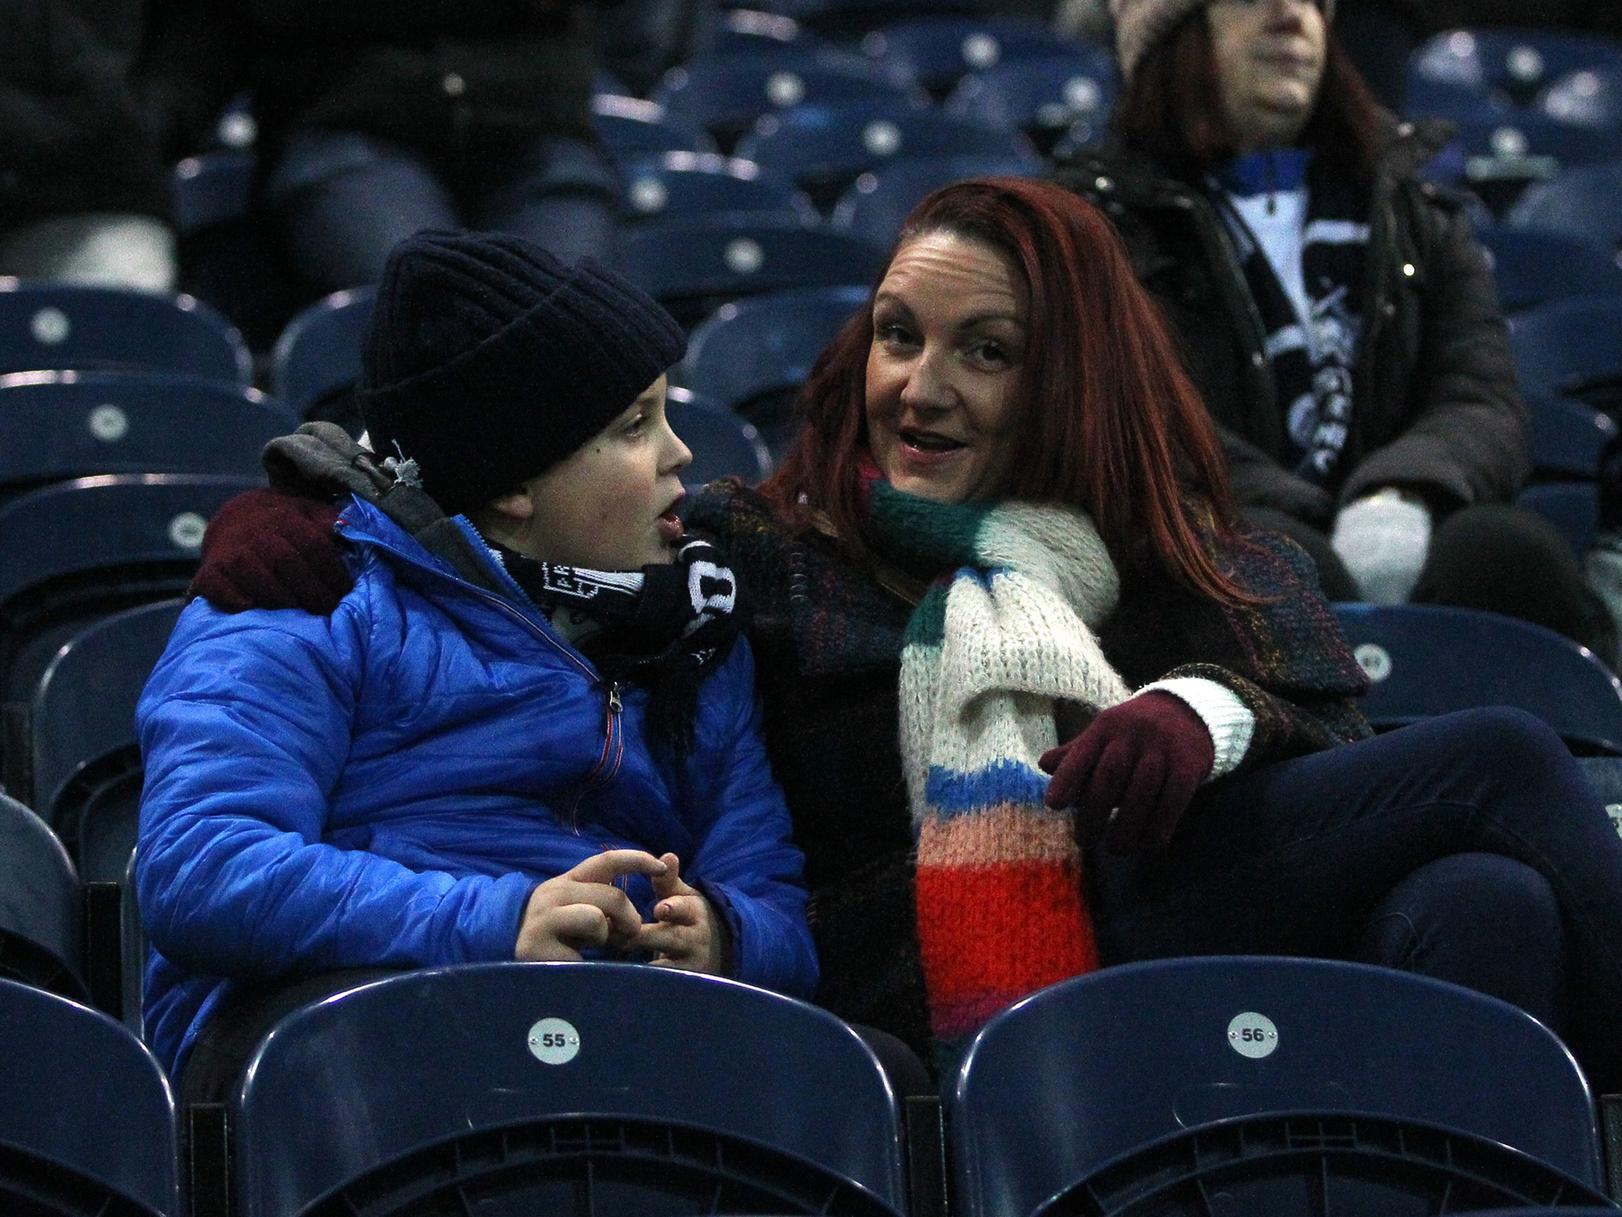 These two North End fans have a chat.